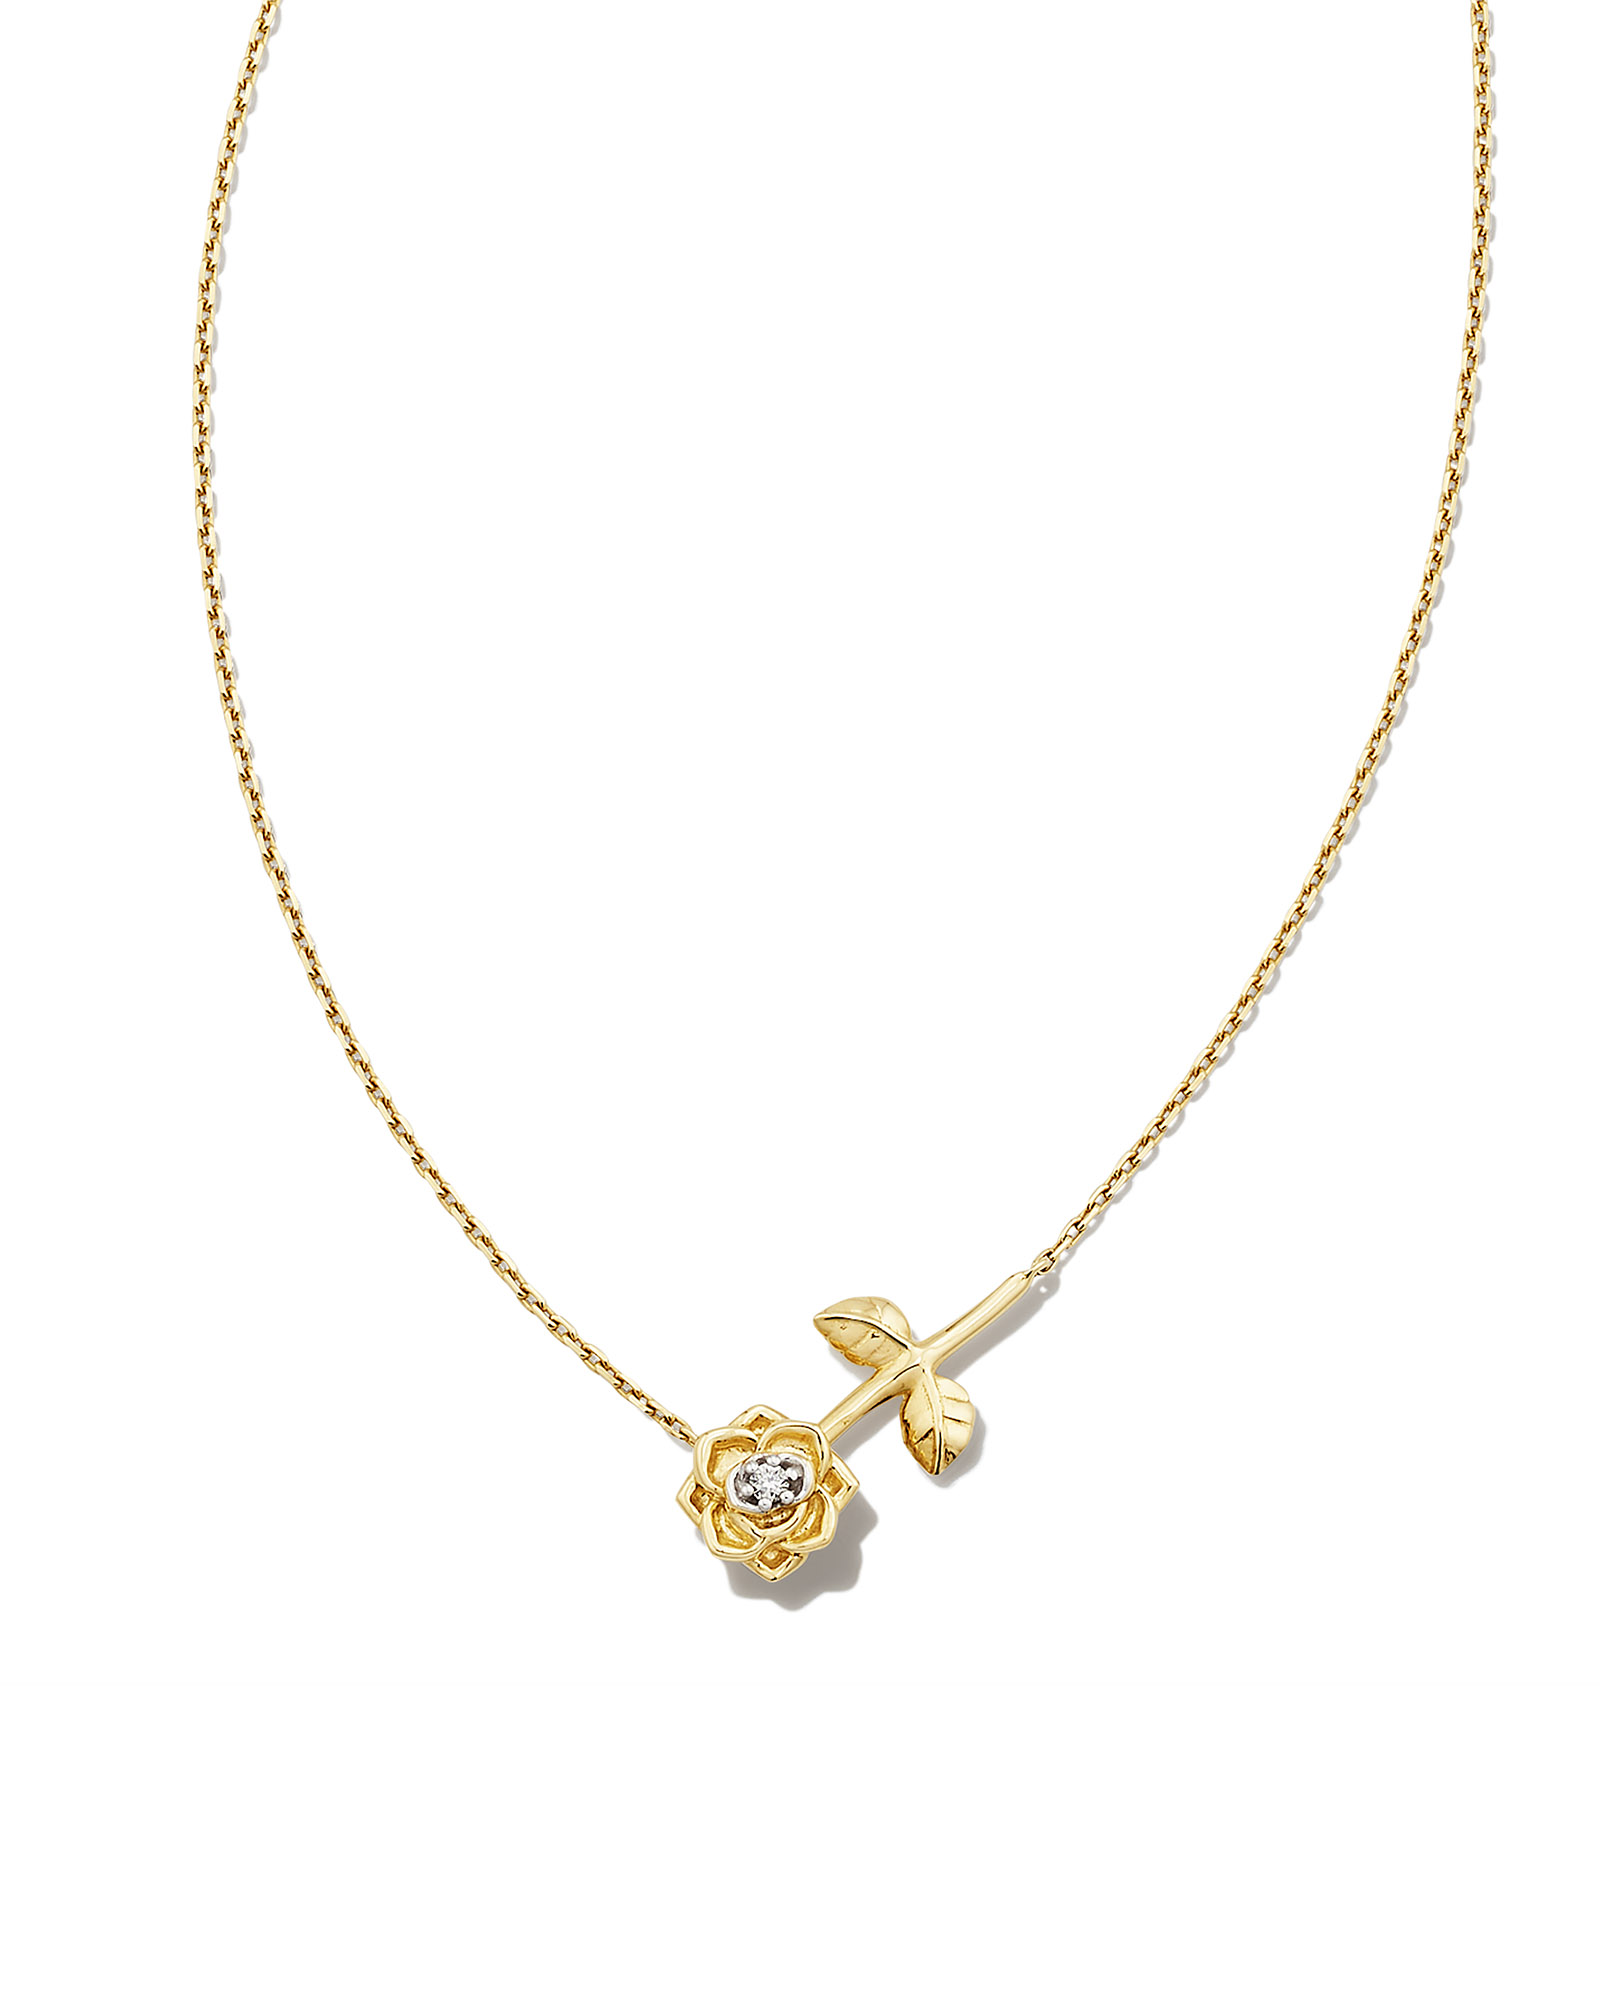 Ansel Rose 14k Yellow Gold Pendant Necklace in White Diamond